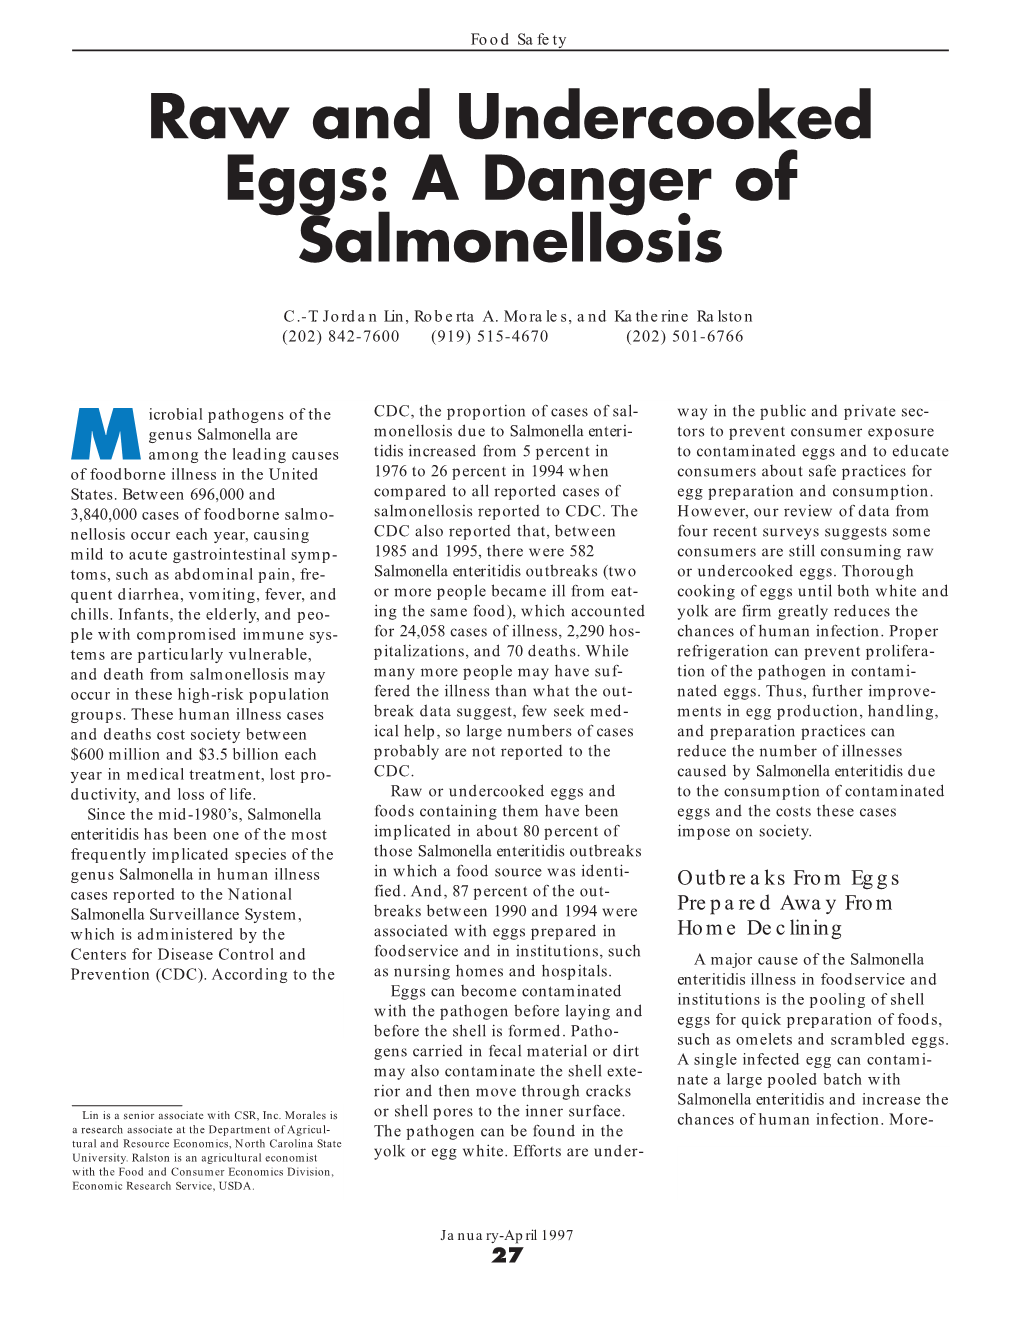 Raw and Undercooked Eggs: a Danger of Salmonellosis